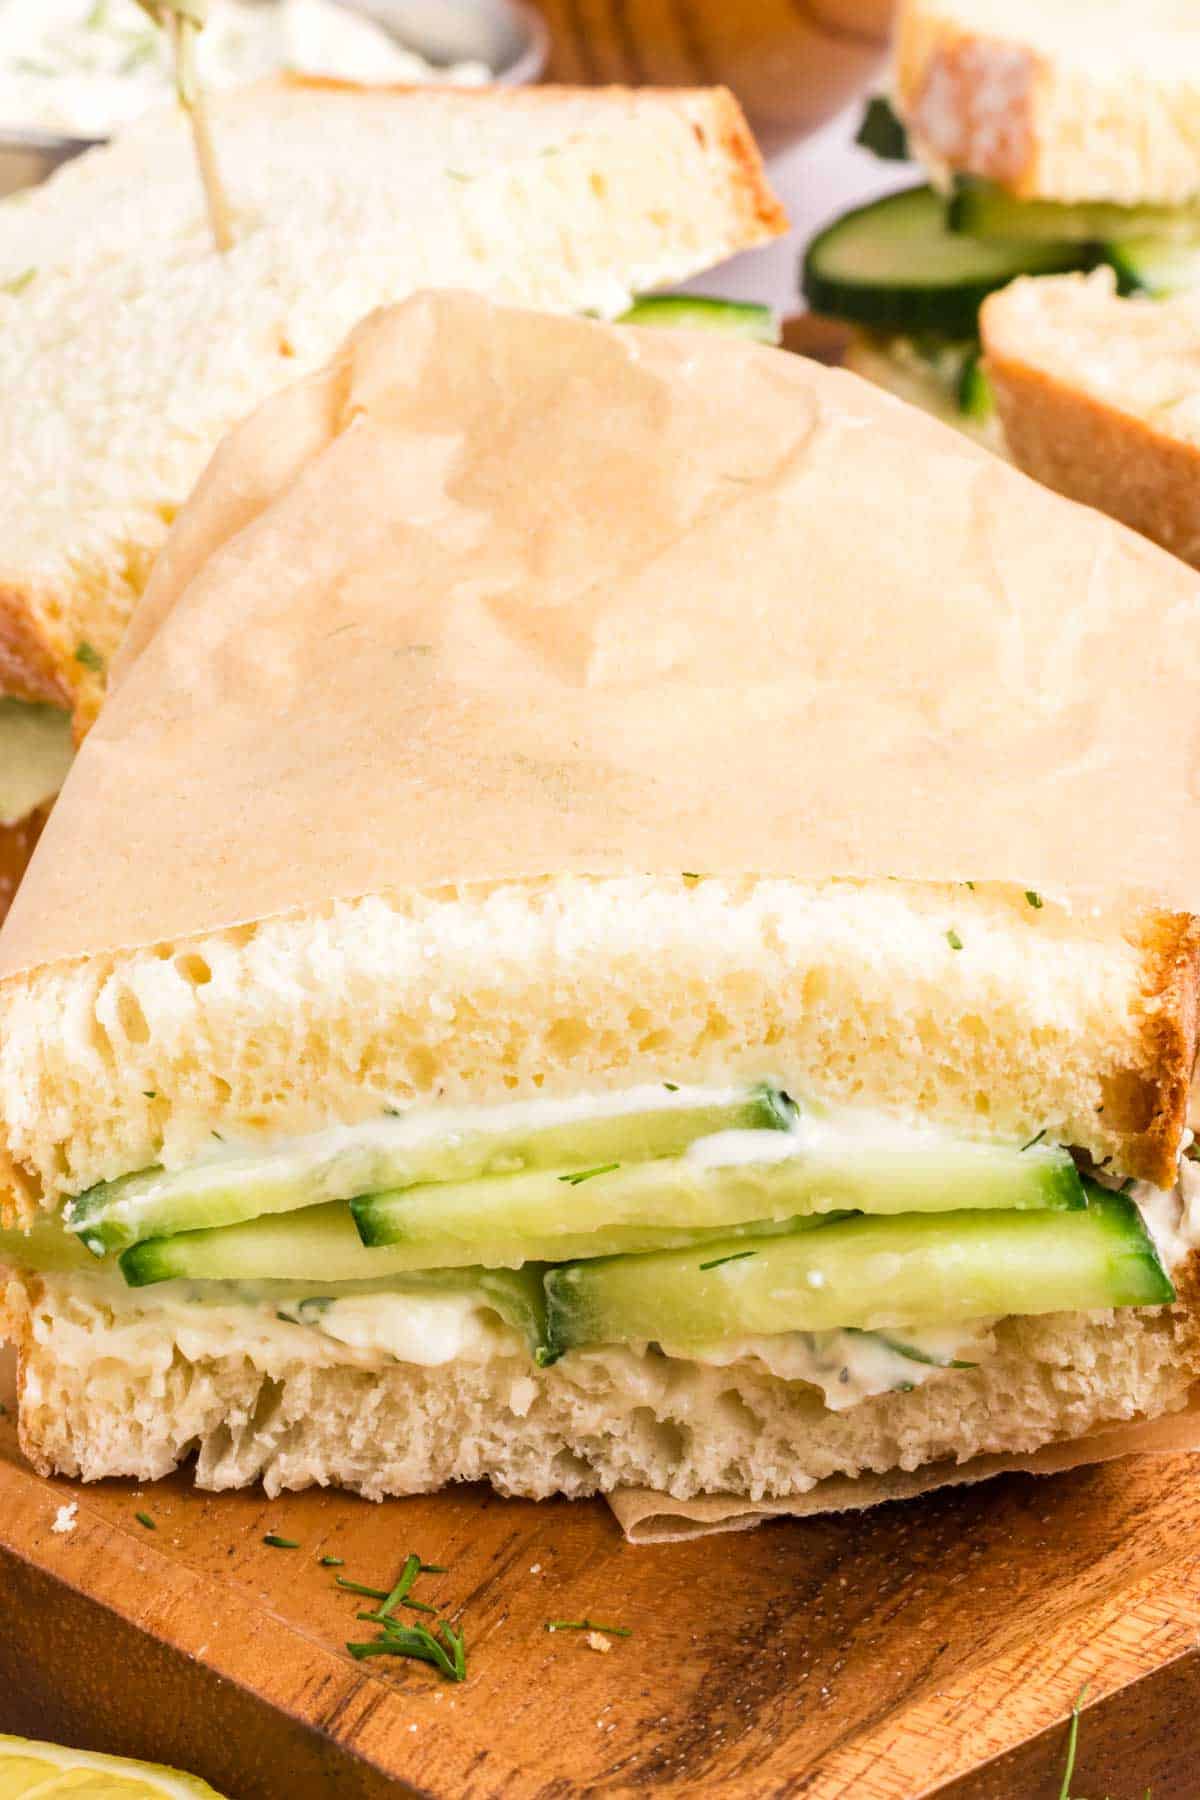 A cucumber sandwich sliced in half and wrapped in brown wax paper.